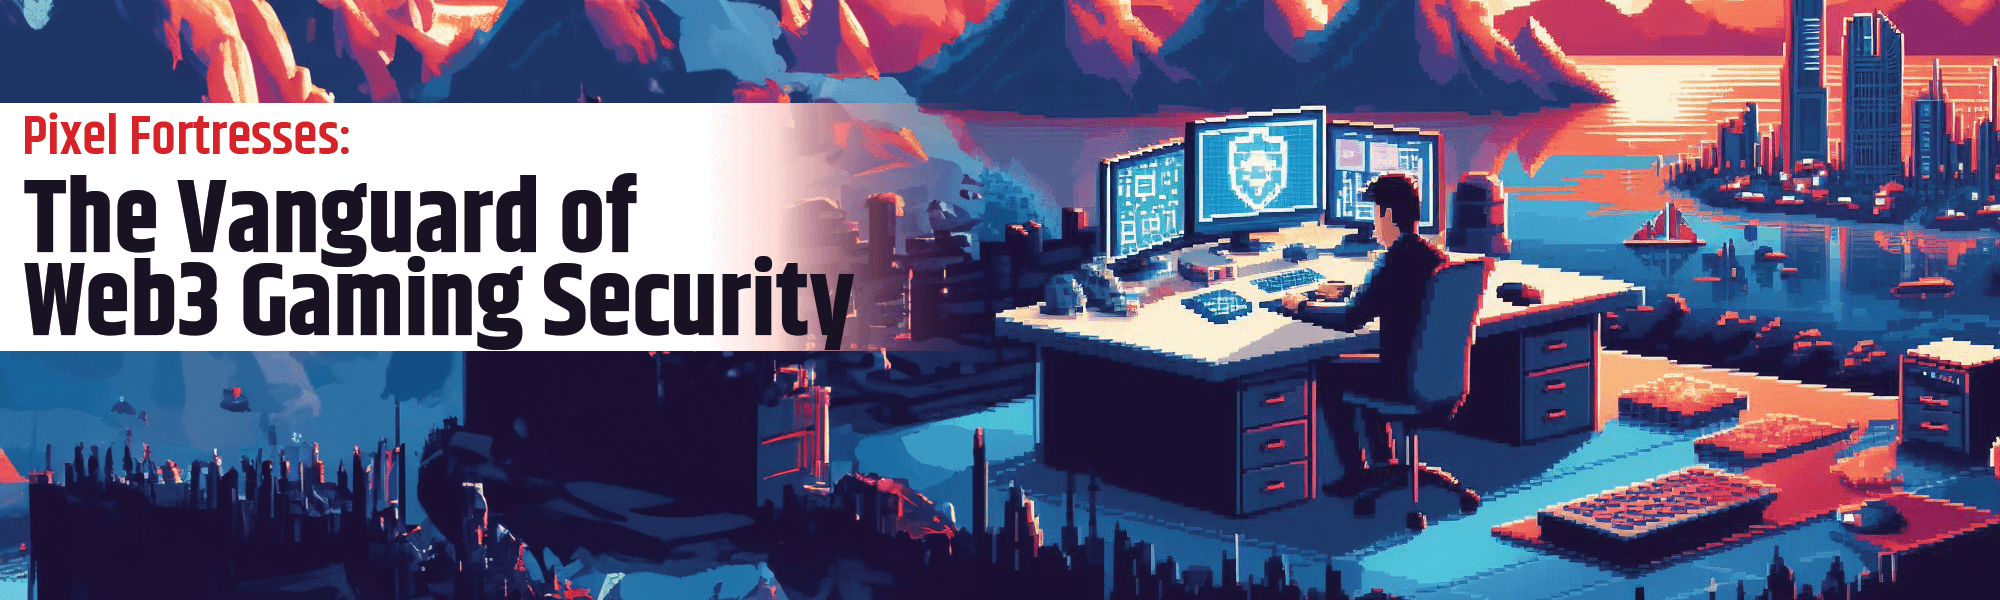 Pixel Fortresses: The Vanguard of Web3 Gaming Security